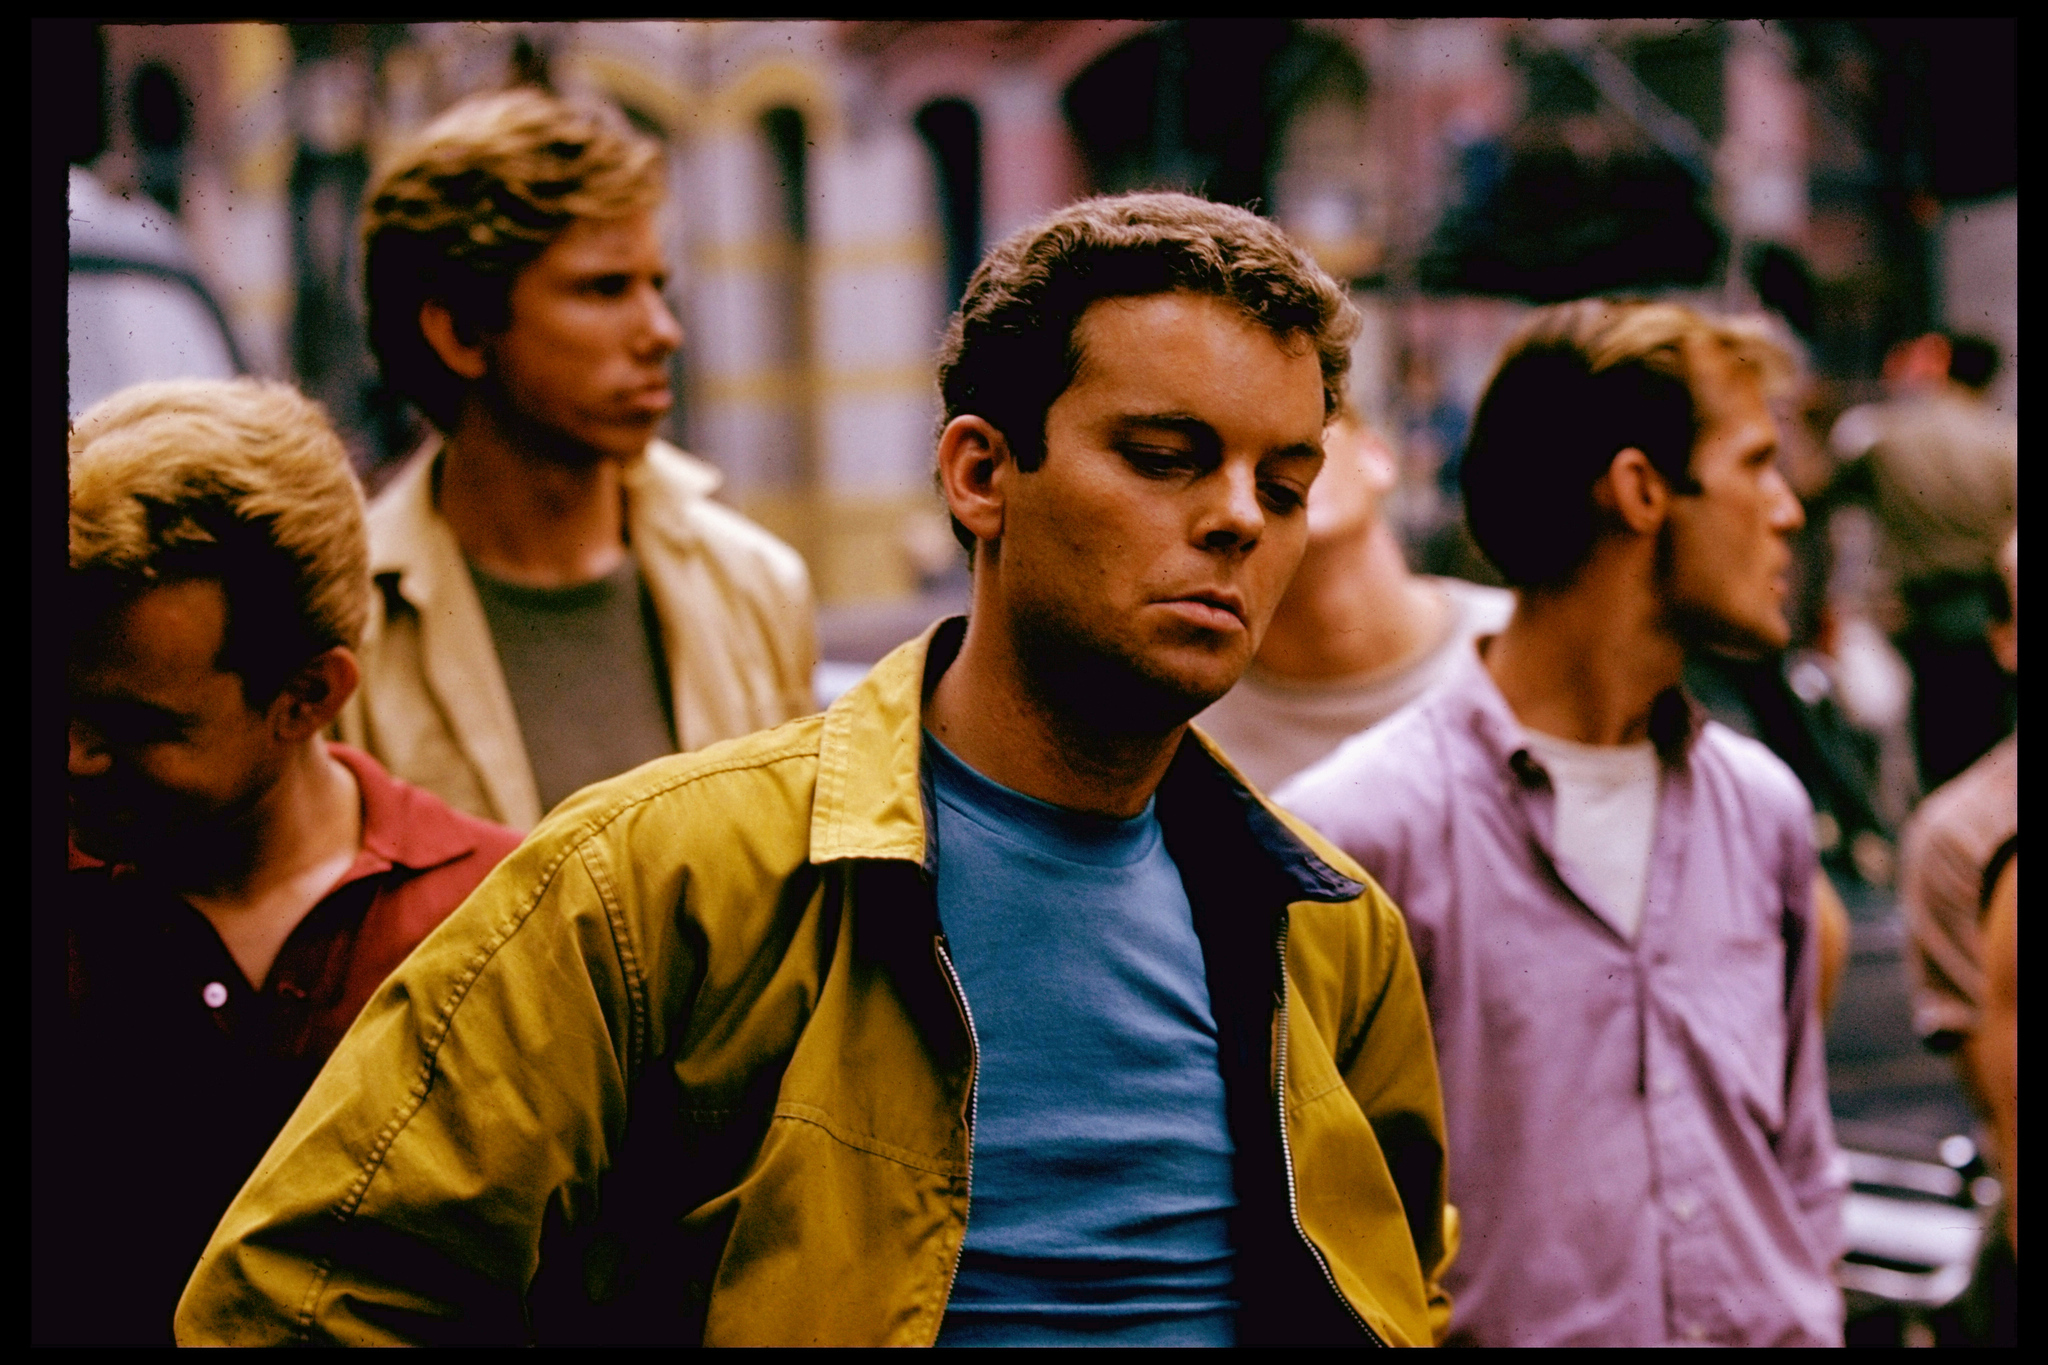 David Winters, Russ Tamblyn, and Anthony 'Scooter' Teague in West Side Story (1961)